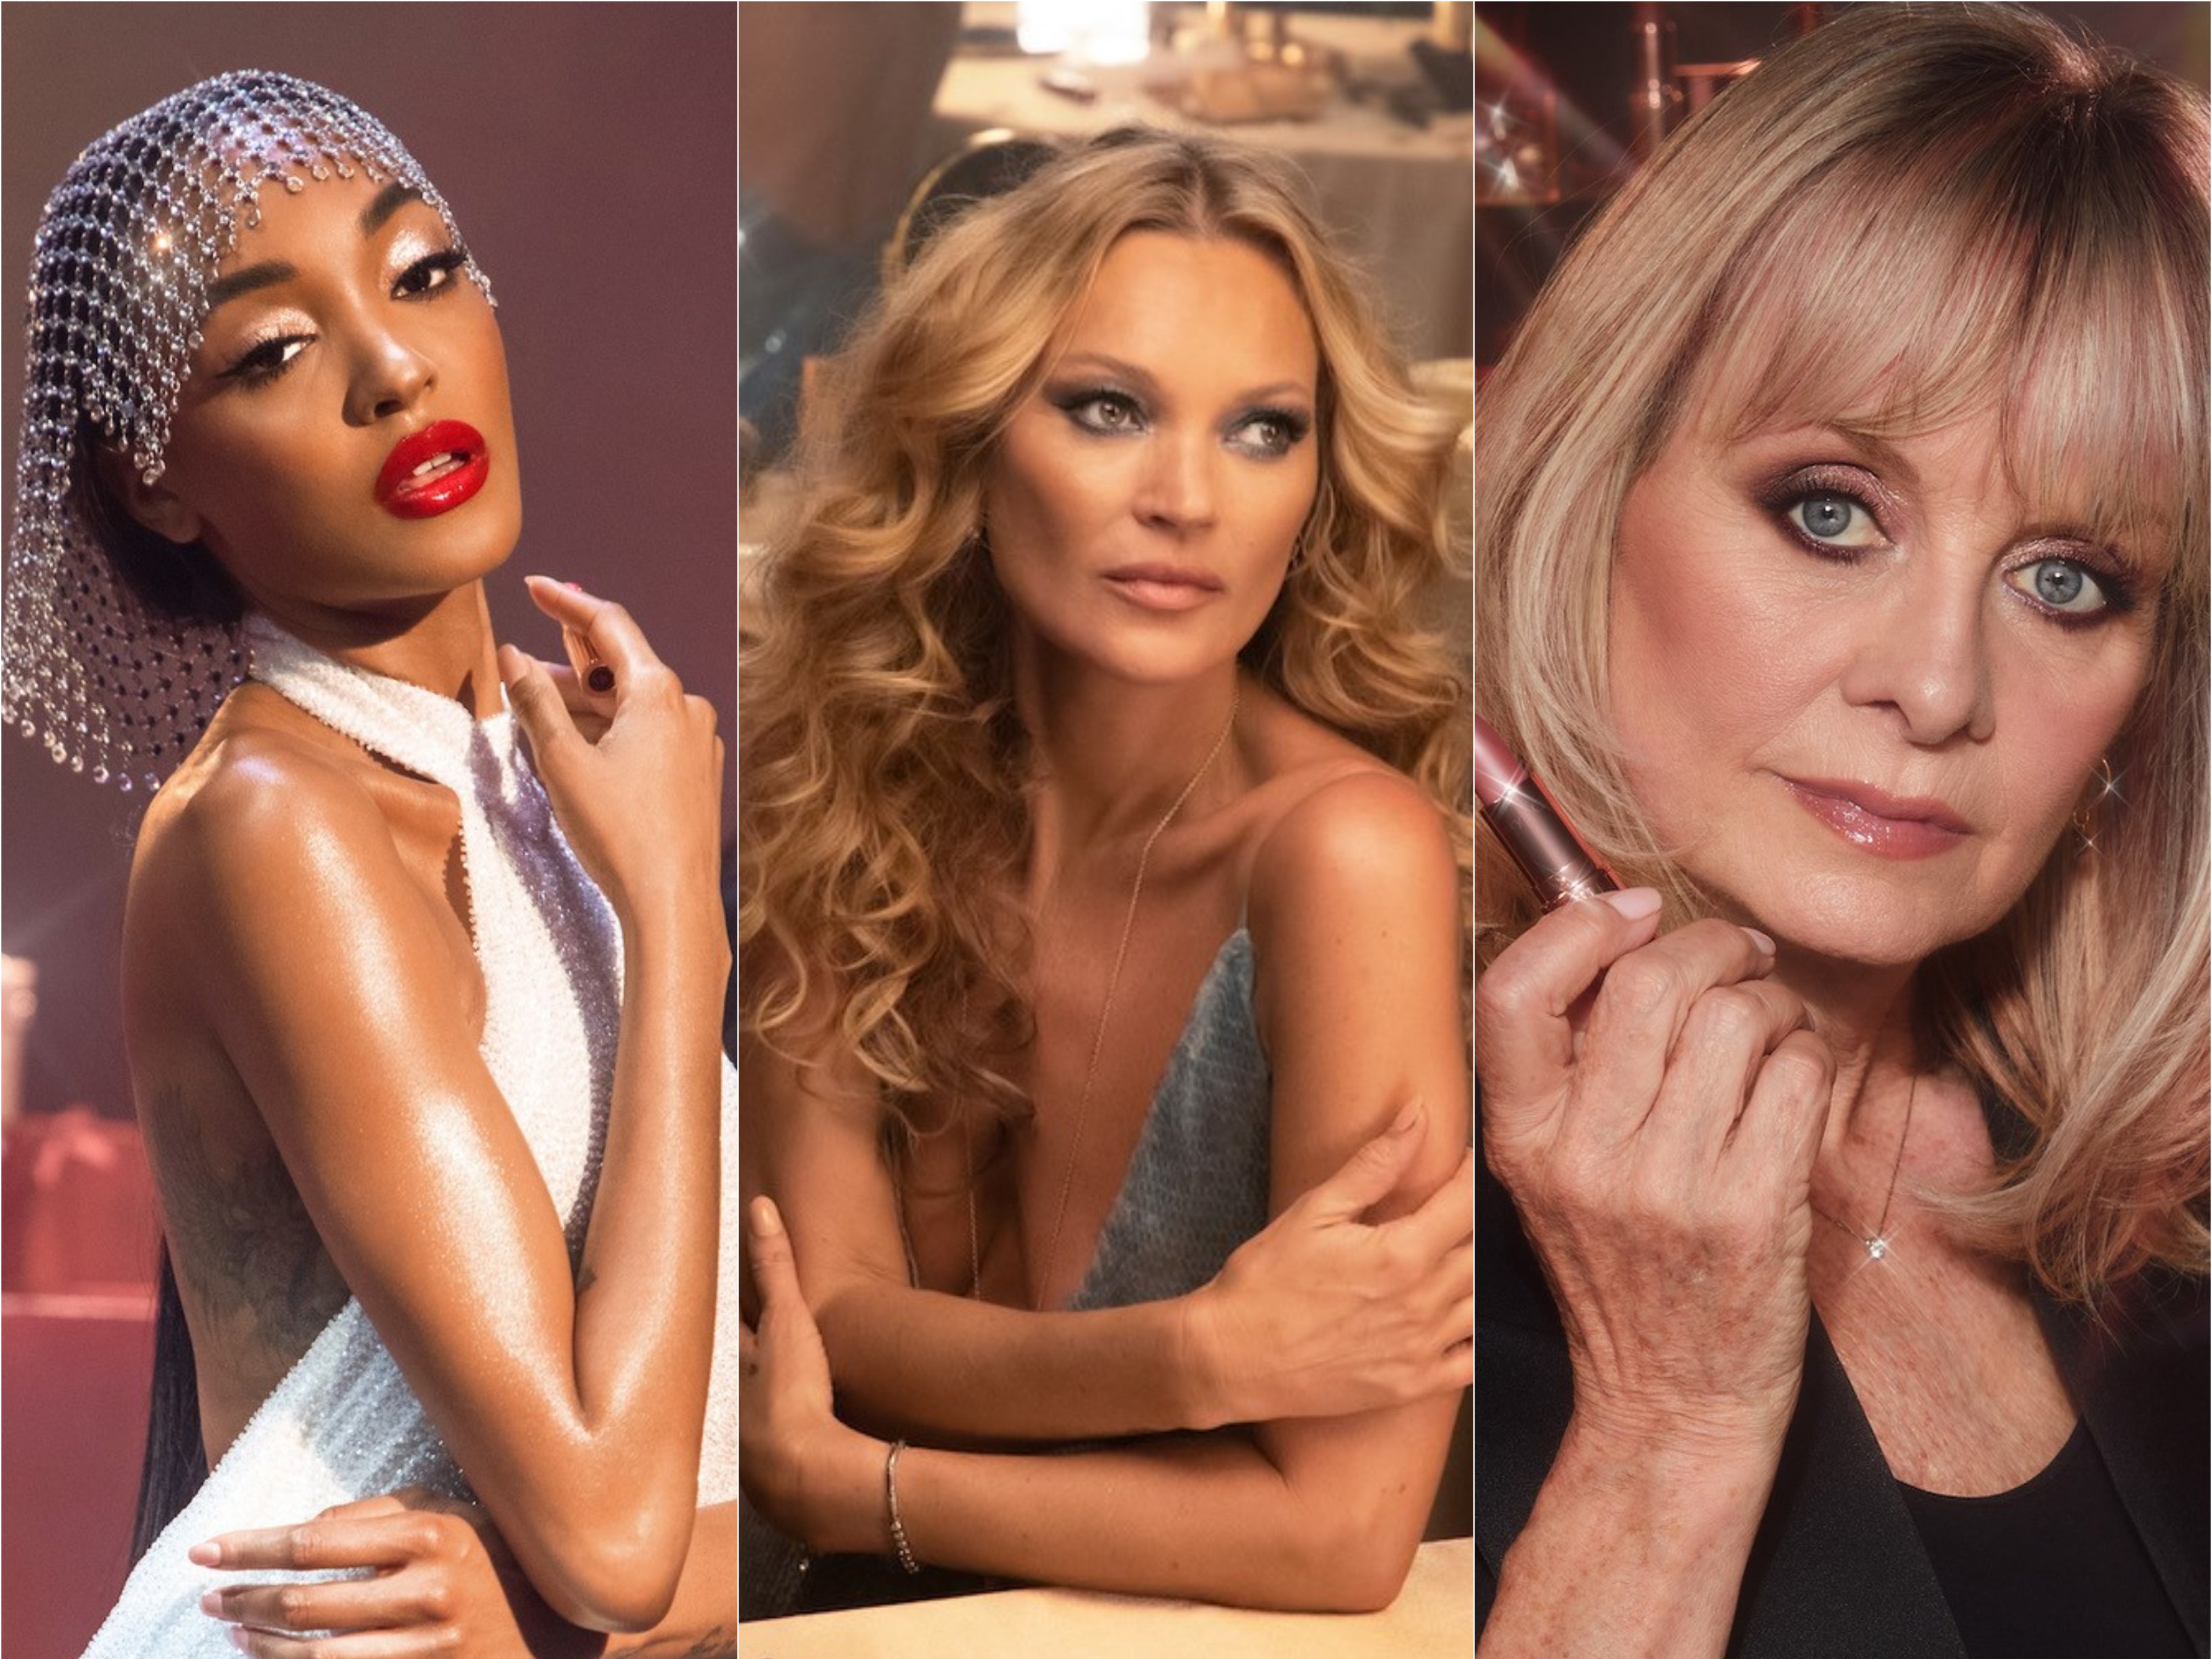 Kate Moss, Twiggy, Jourdan Dunn and Lily James star in new Charlotte Tilbury campaign The Independent